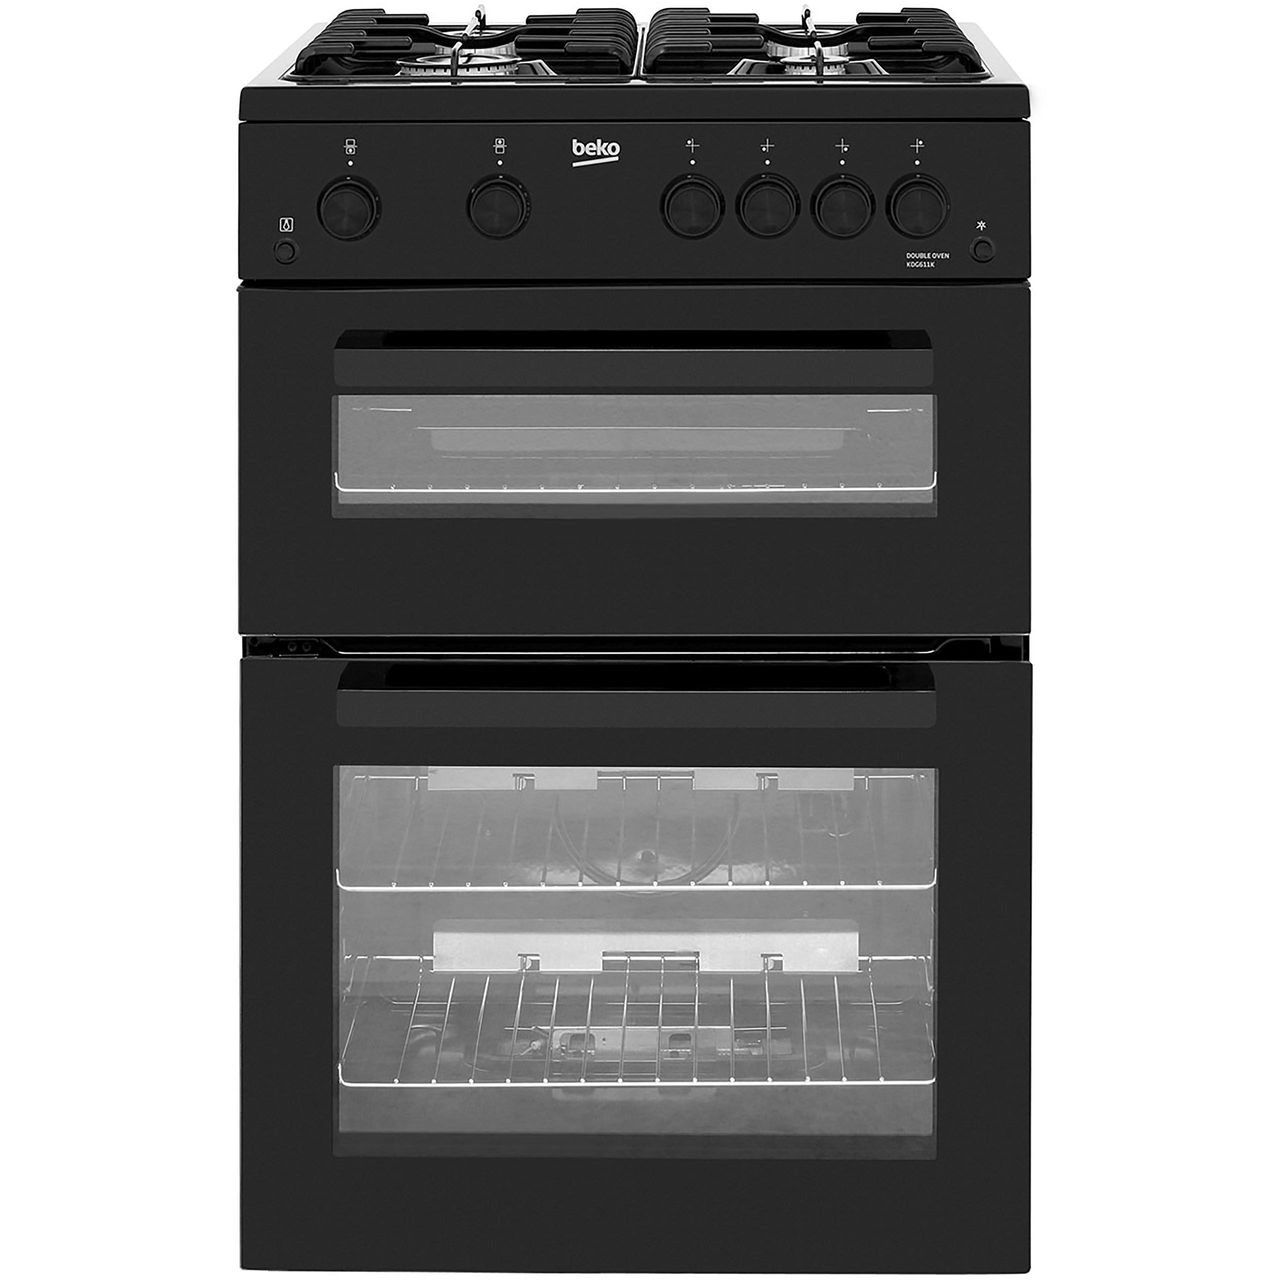 Beko KDG611K 60cm Gas Cooker with Full Width Gas Grill Review